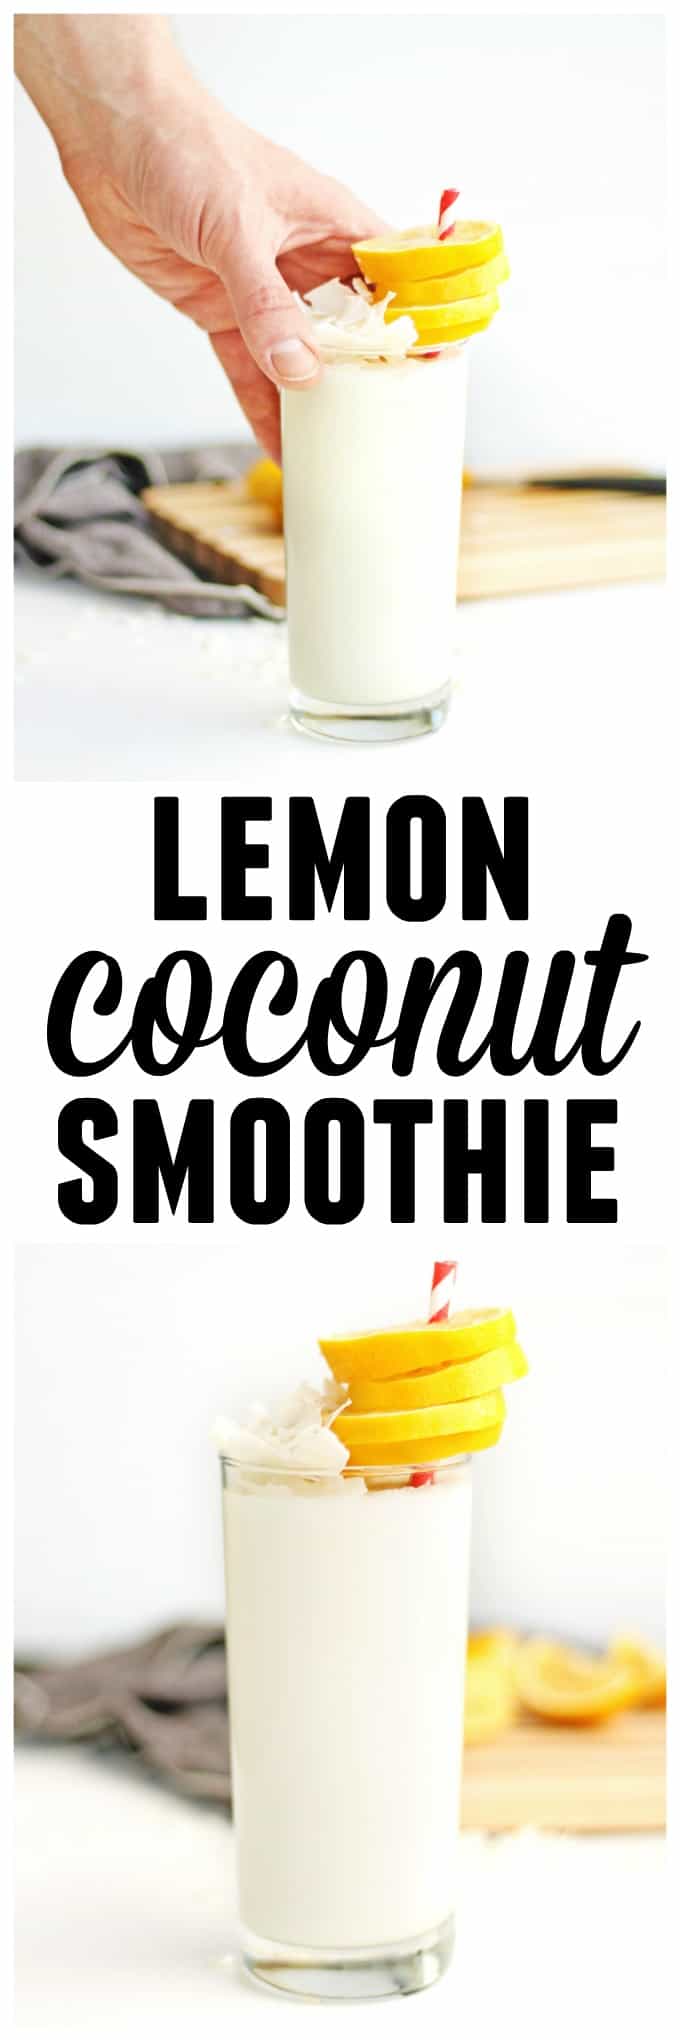 Healthy lemon coconut smoothie recipe! A tart, yet sweet way to load up on probiotics and nutrients. // Rhubarbarians // yogurt smoothie / tropical smoothie